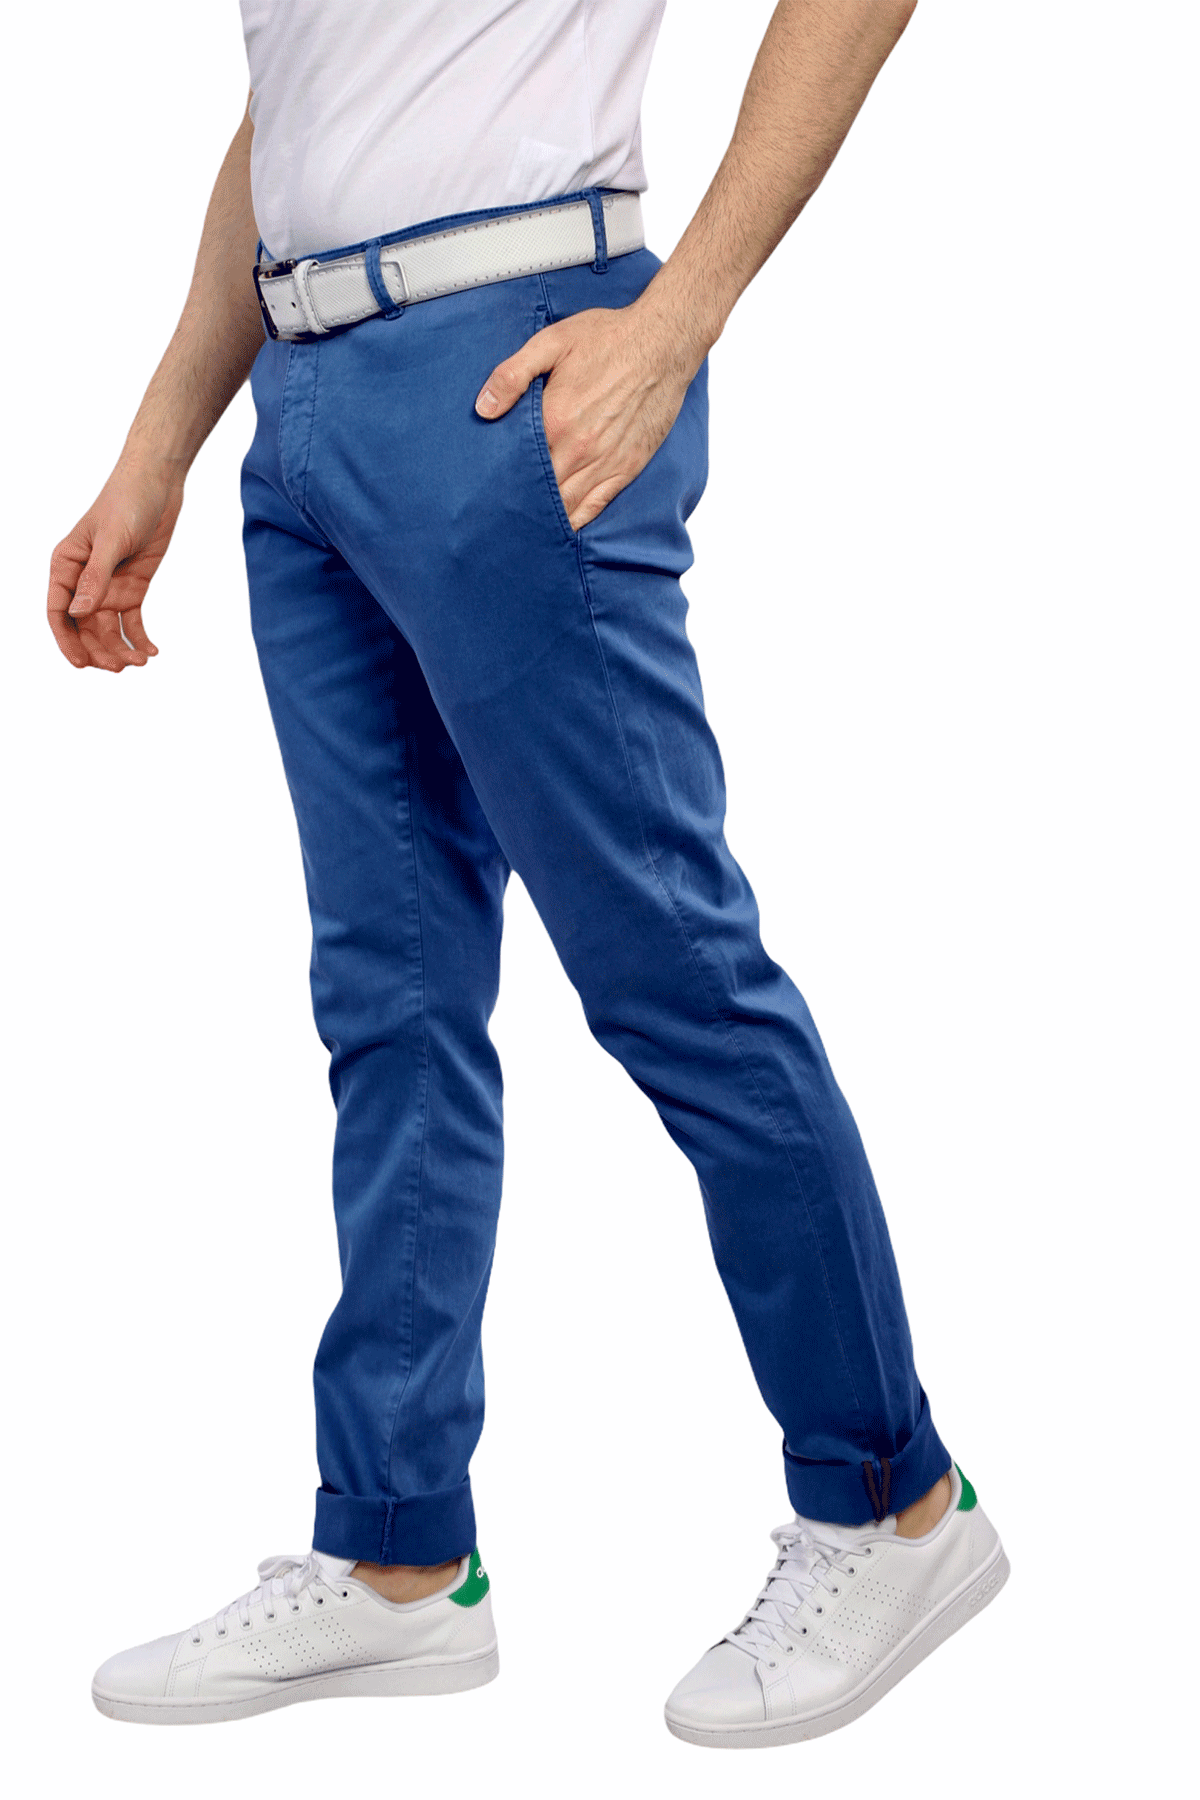 Flat Front Stretch Pants in Royal Blue - 7 Downie St.®